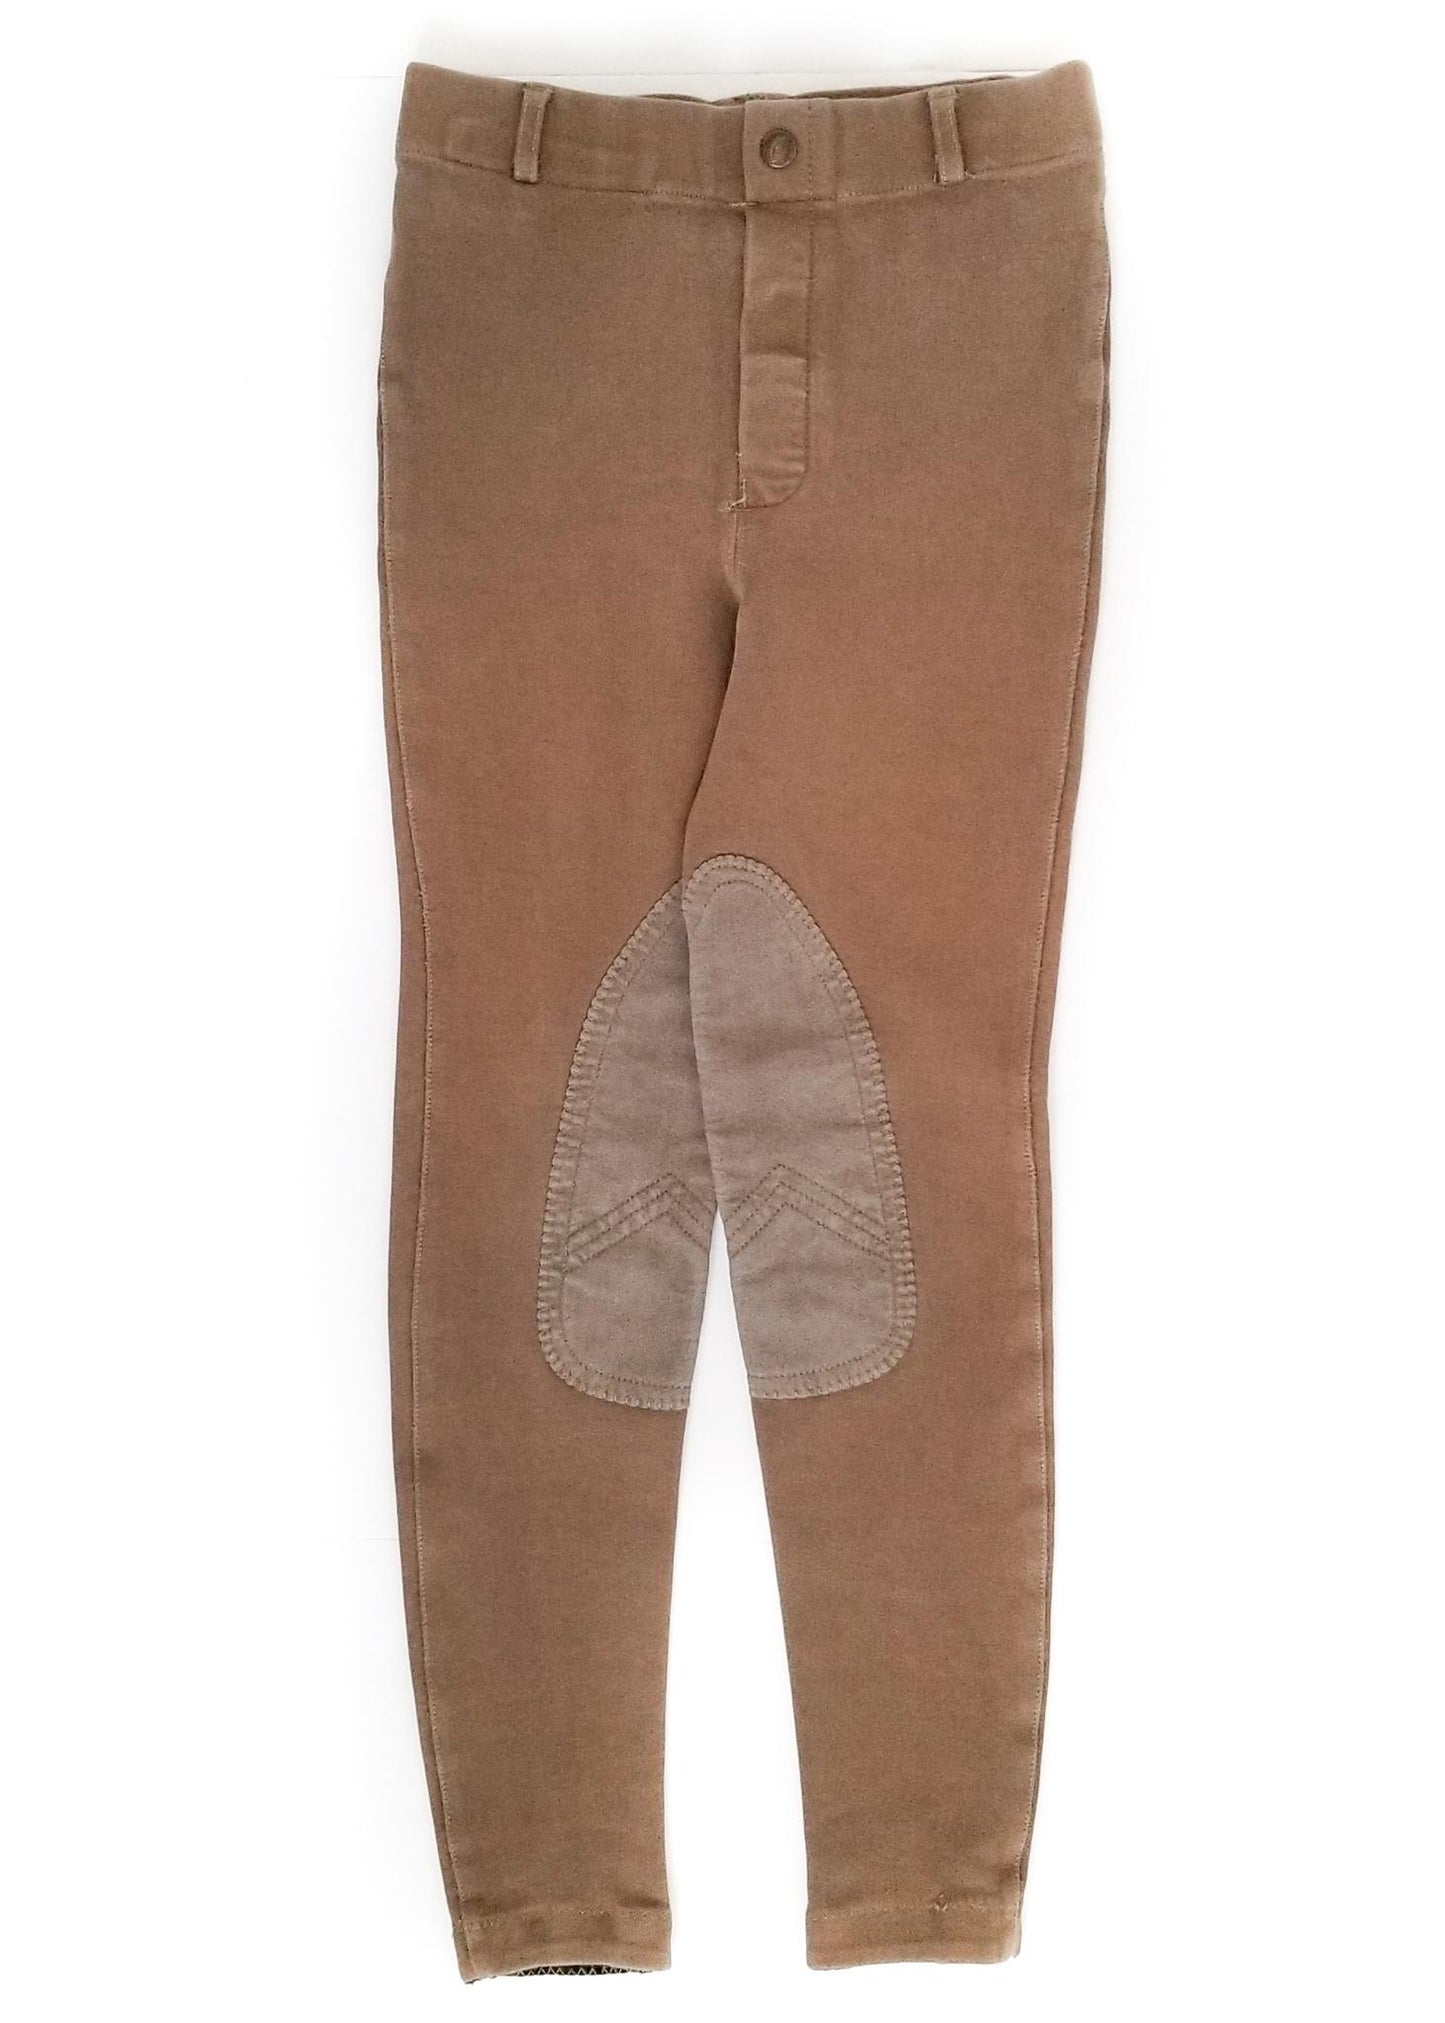 Elation Red Label Pull On Breeches - Brown - Youth 12